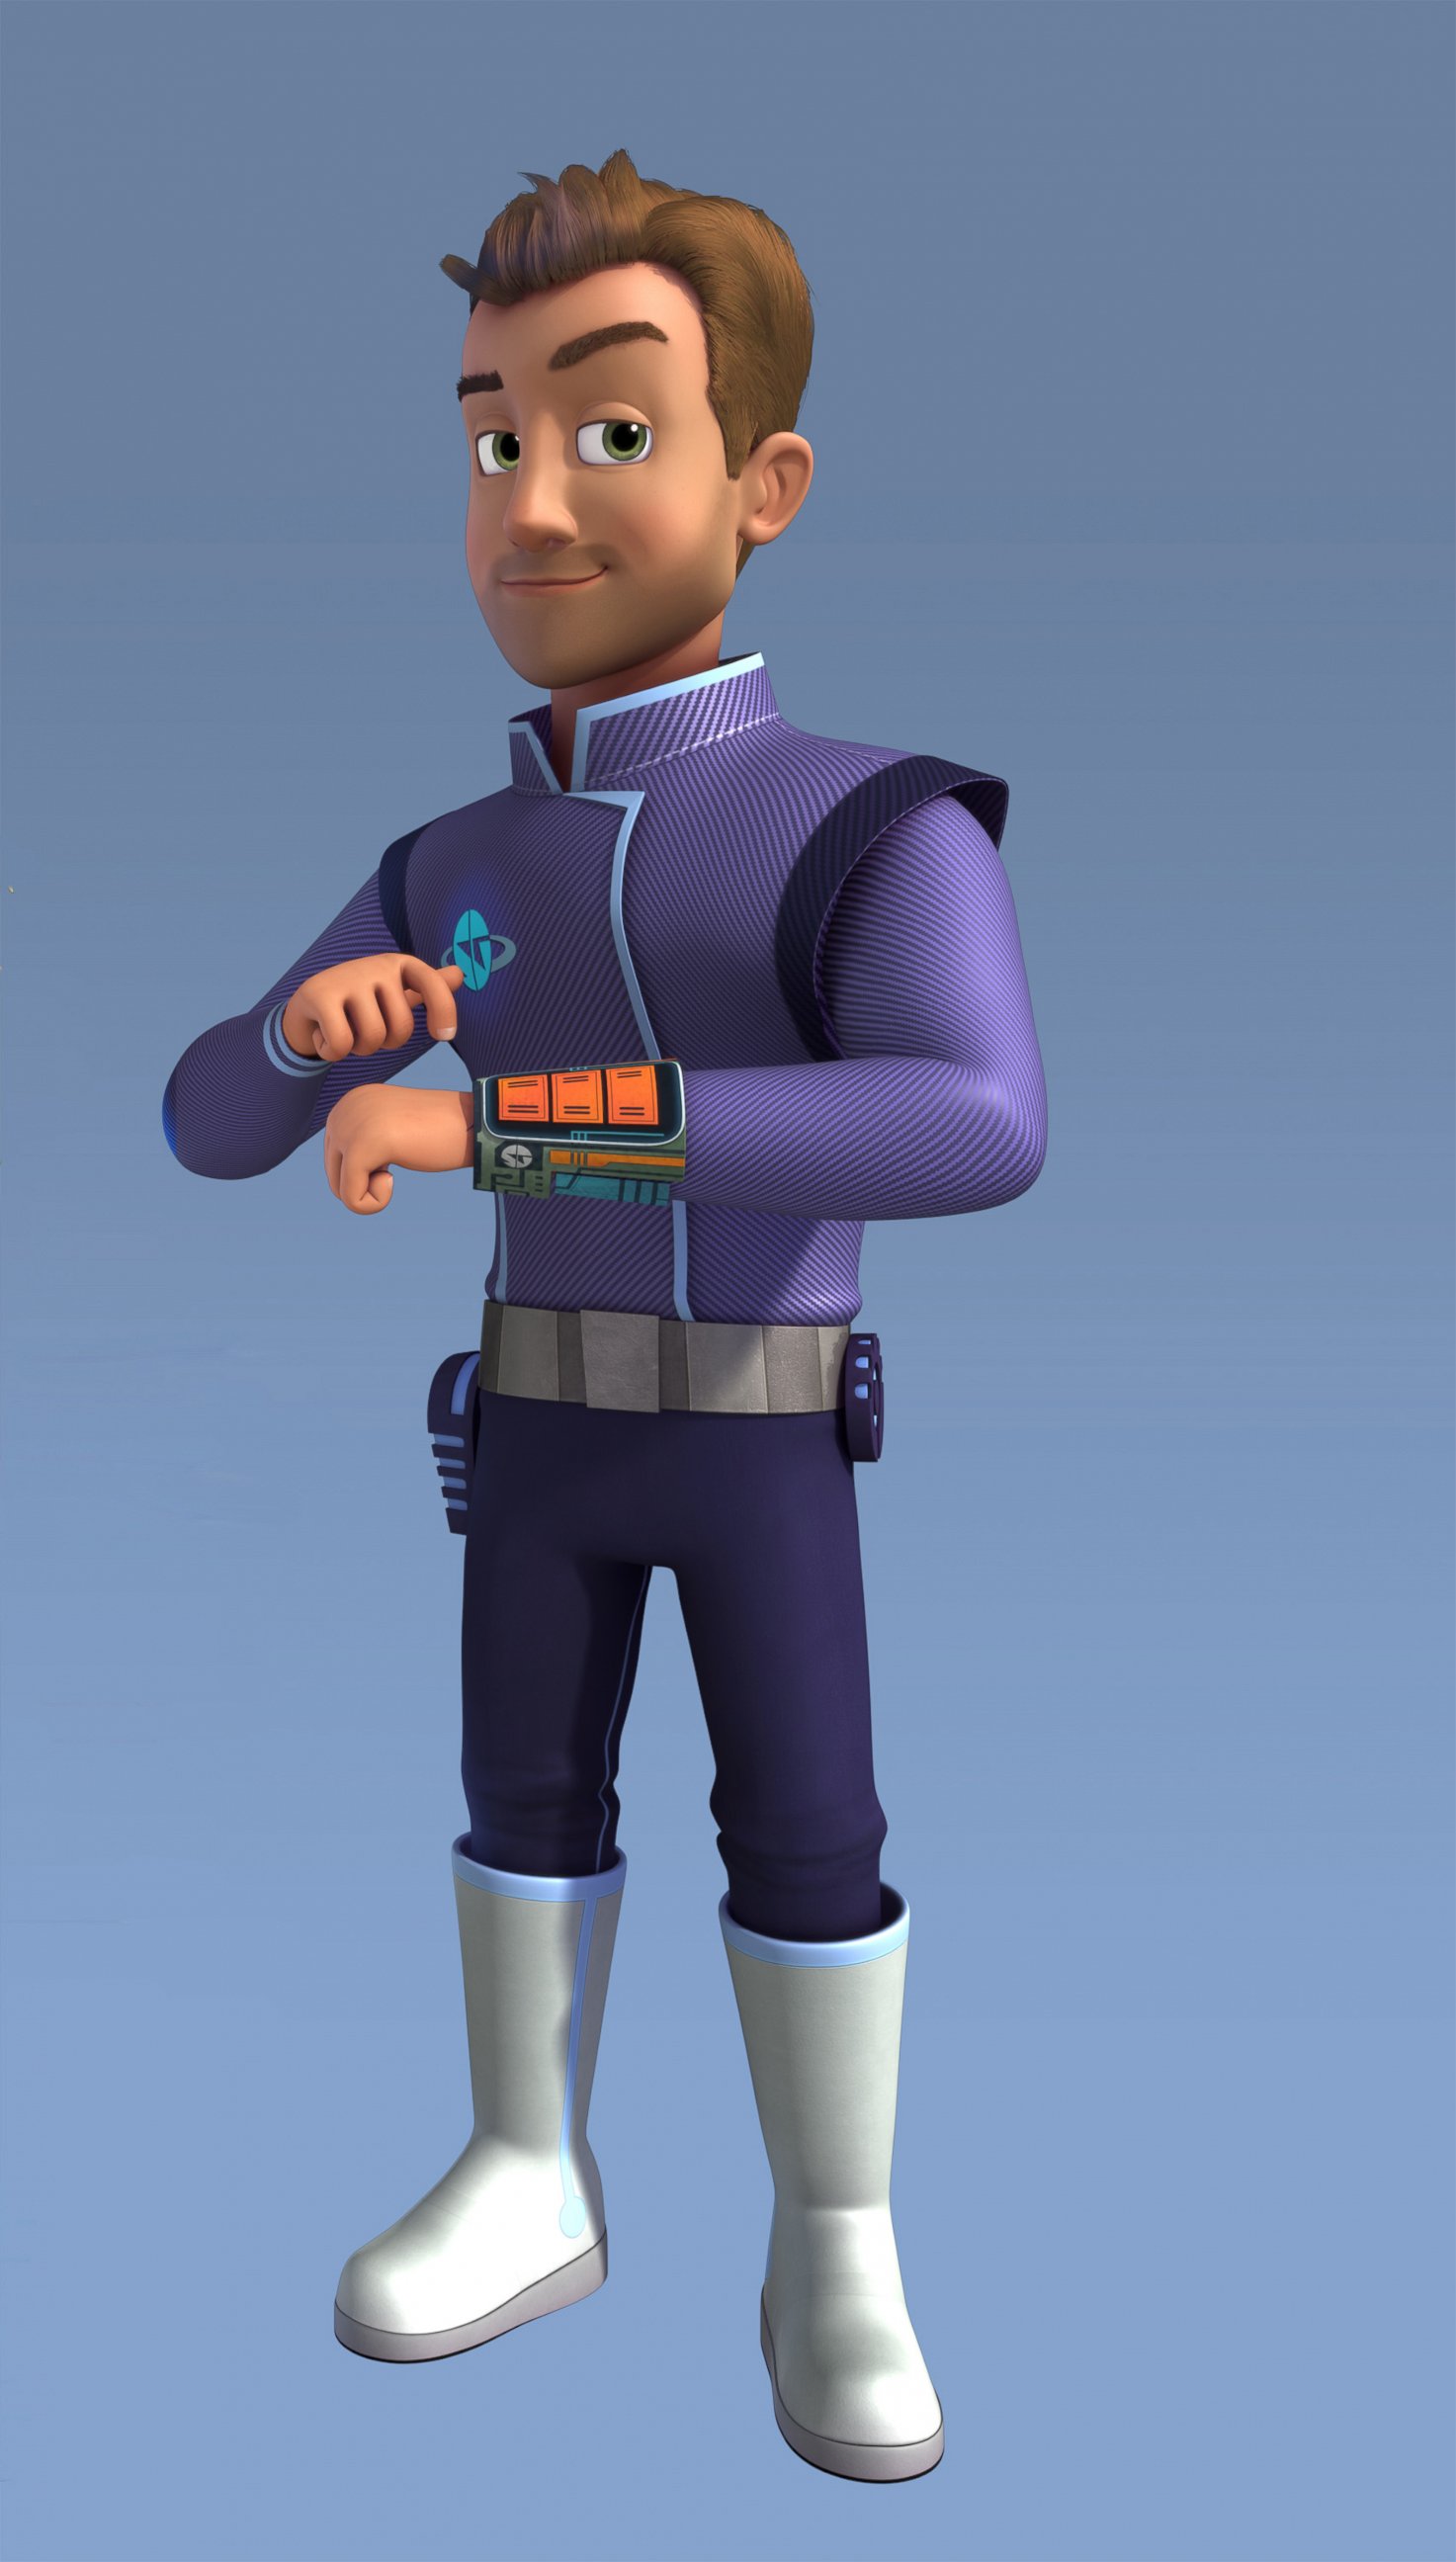 PHOTO: Joe, from Disney Junior's animated series "Miles from Tomorrowland" follows the outer space voyages of young adventurer Miles and his family. 